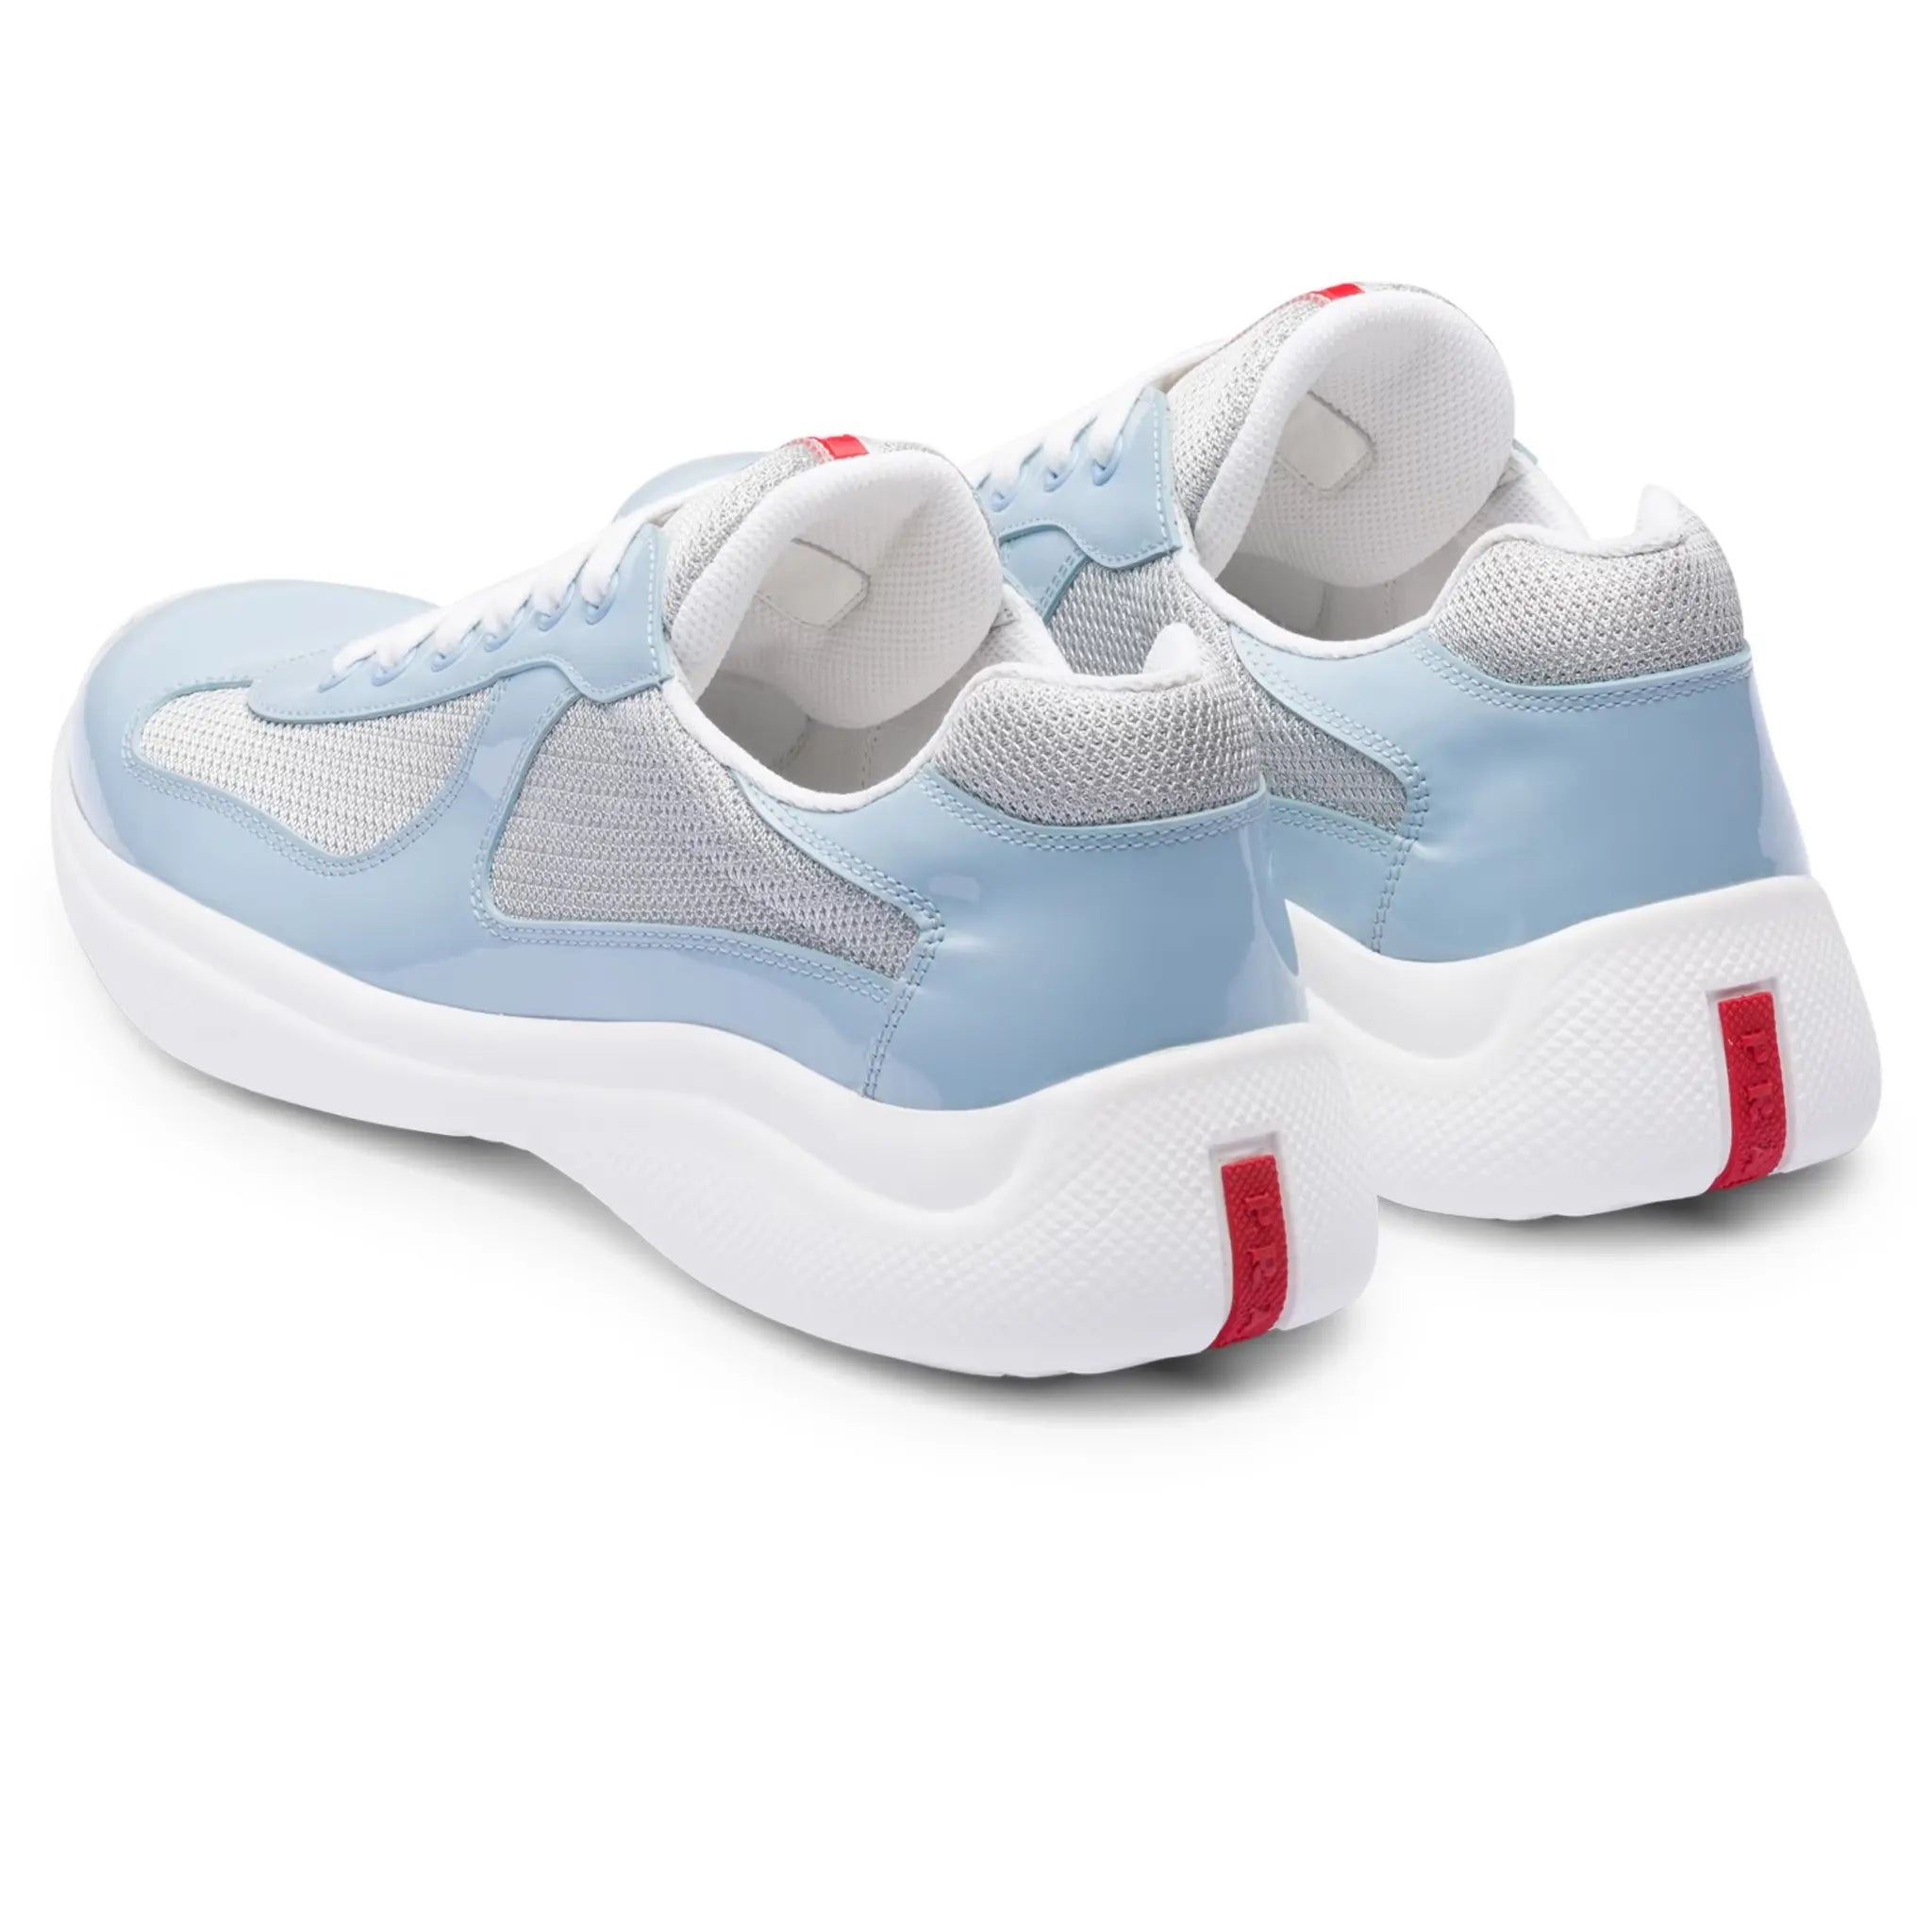 Back view of Prada Americas Cup Patent Leather and Technical Fabric Silver Celeste Sneakers 4E3400_ASZ_F0D9Z